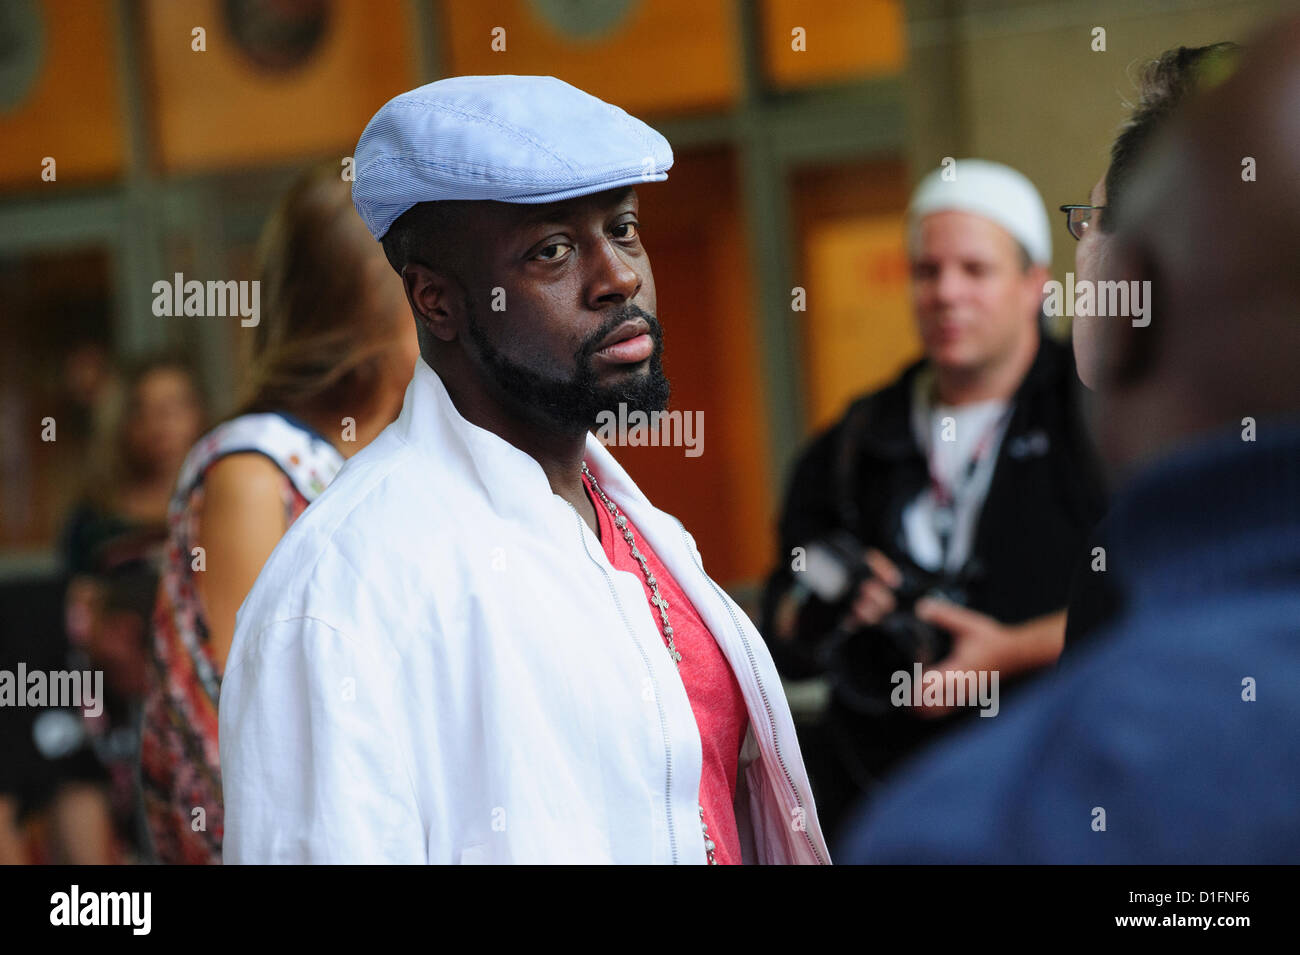 Hatian-Canadian musician and activist Wyclef Jean attends the Ryerson University Theatre during the 2012 Toronto International Film Festival (TIFF) Stock Photo